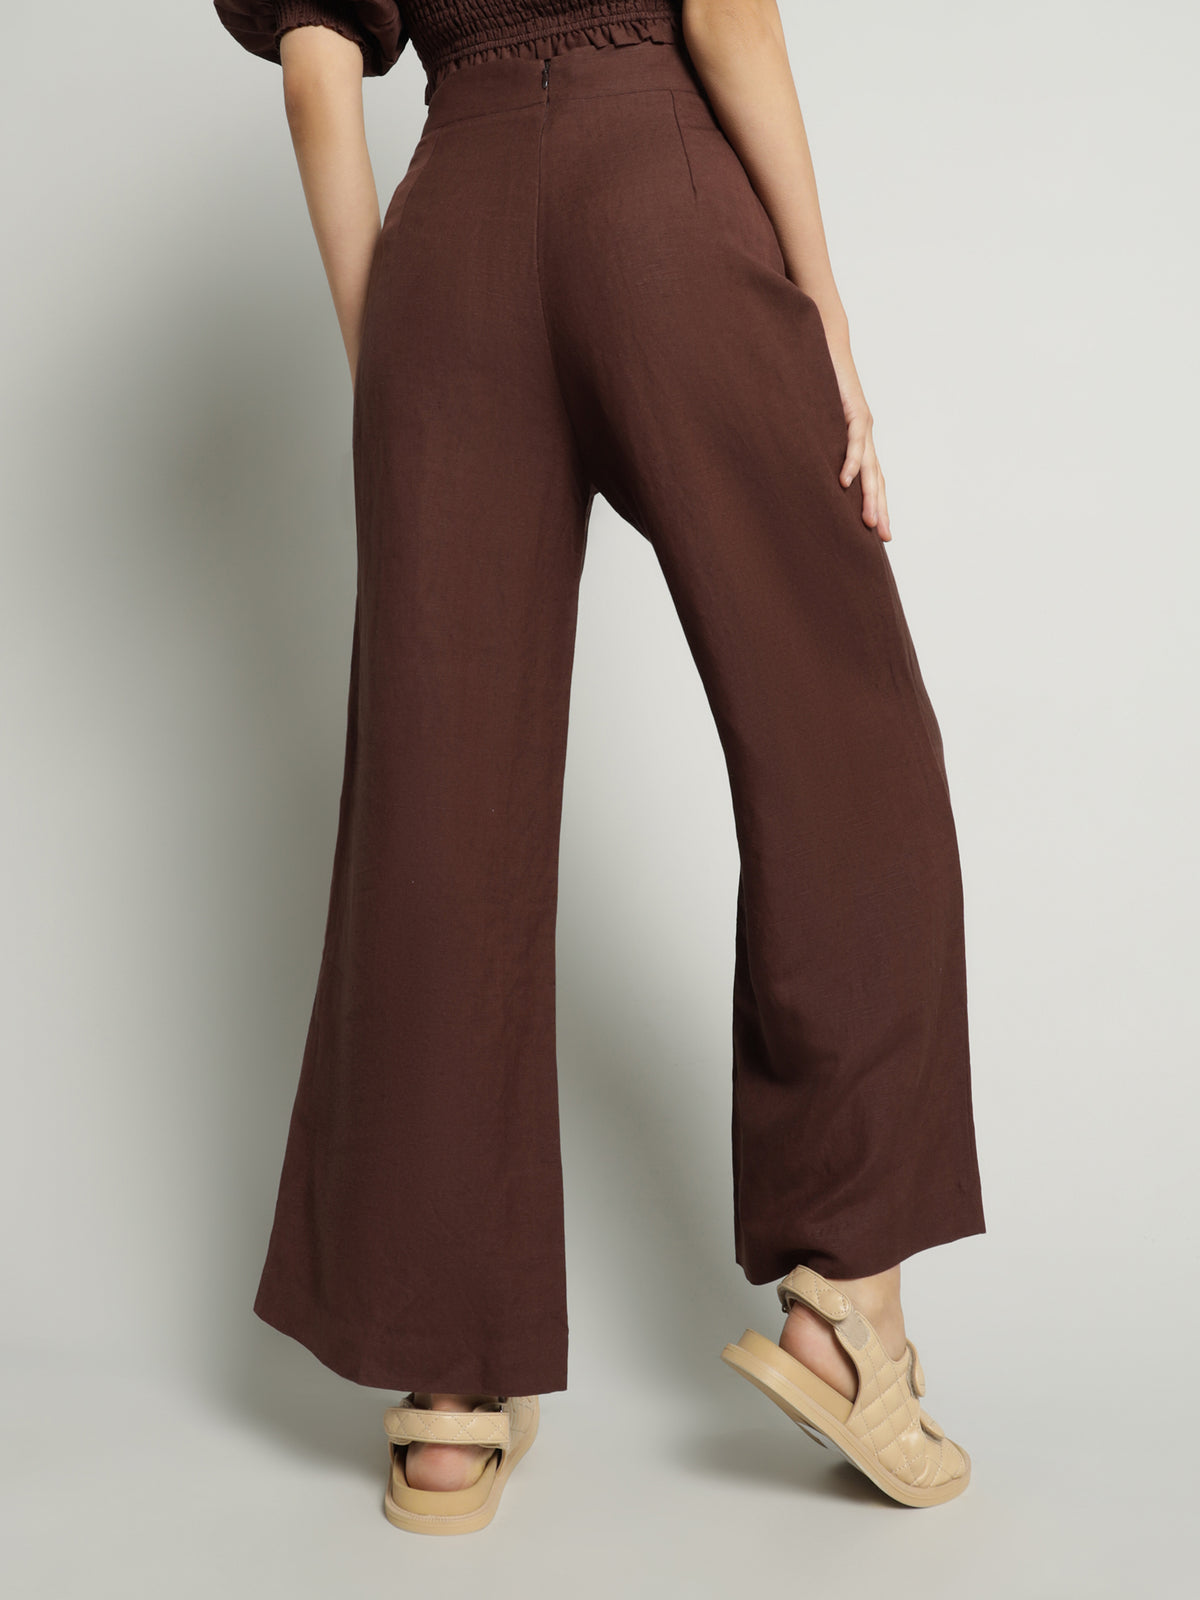 Desiree Linen Culotte Pants in Cacao